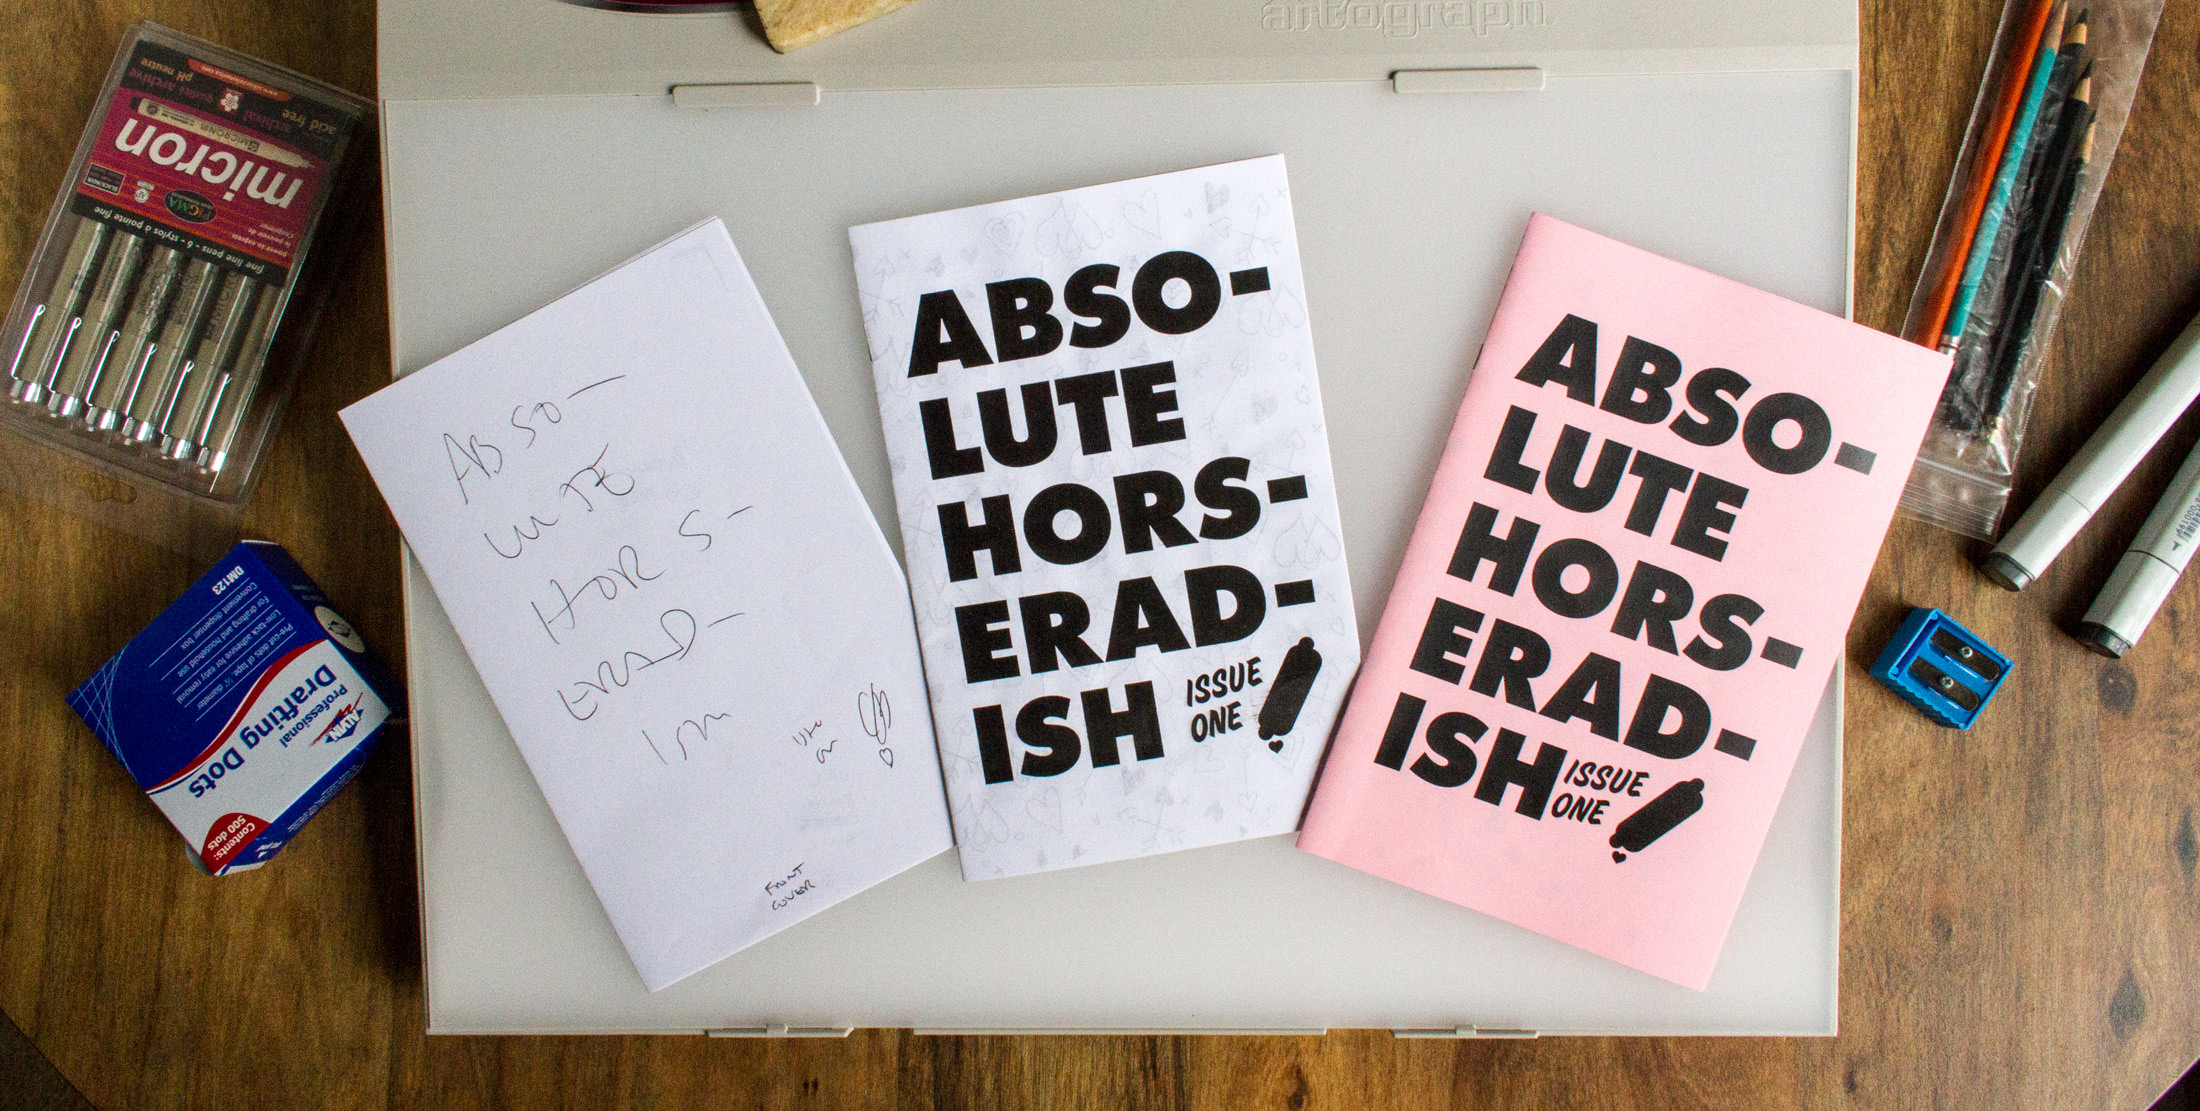 The series of prototypes created before printing the final version of Absolute Horseradish Issue 1.